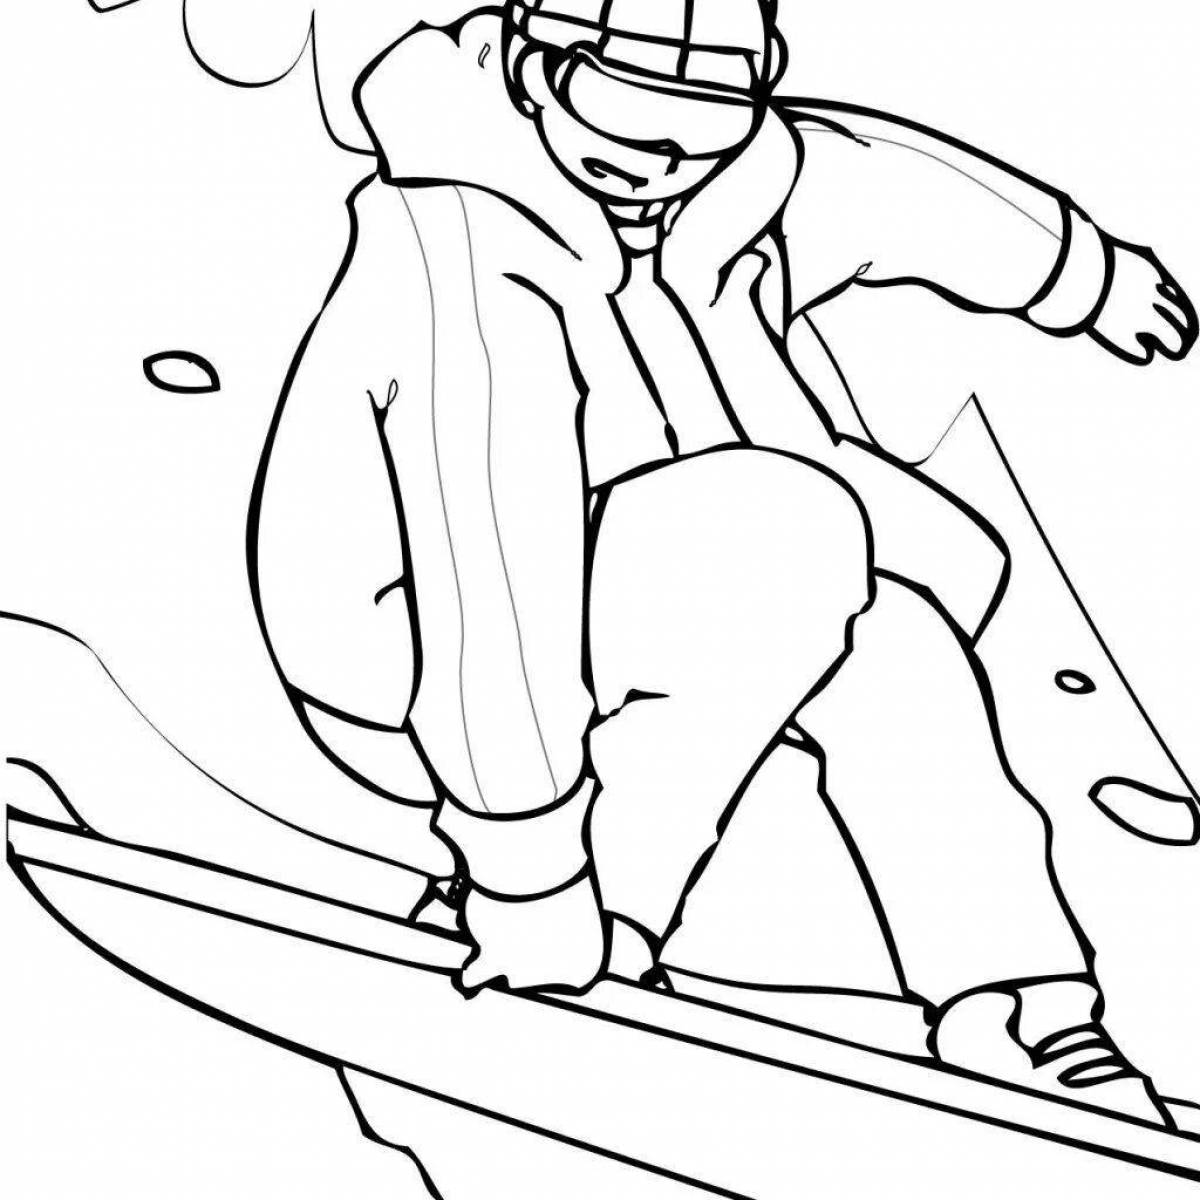 Fabulous snowboarder coloring book for kids